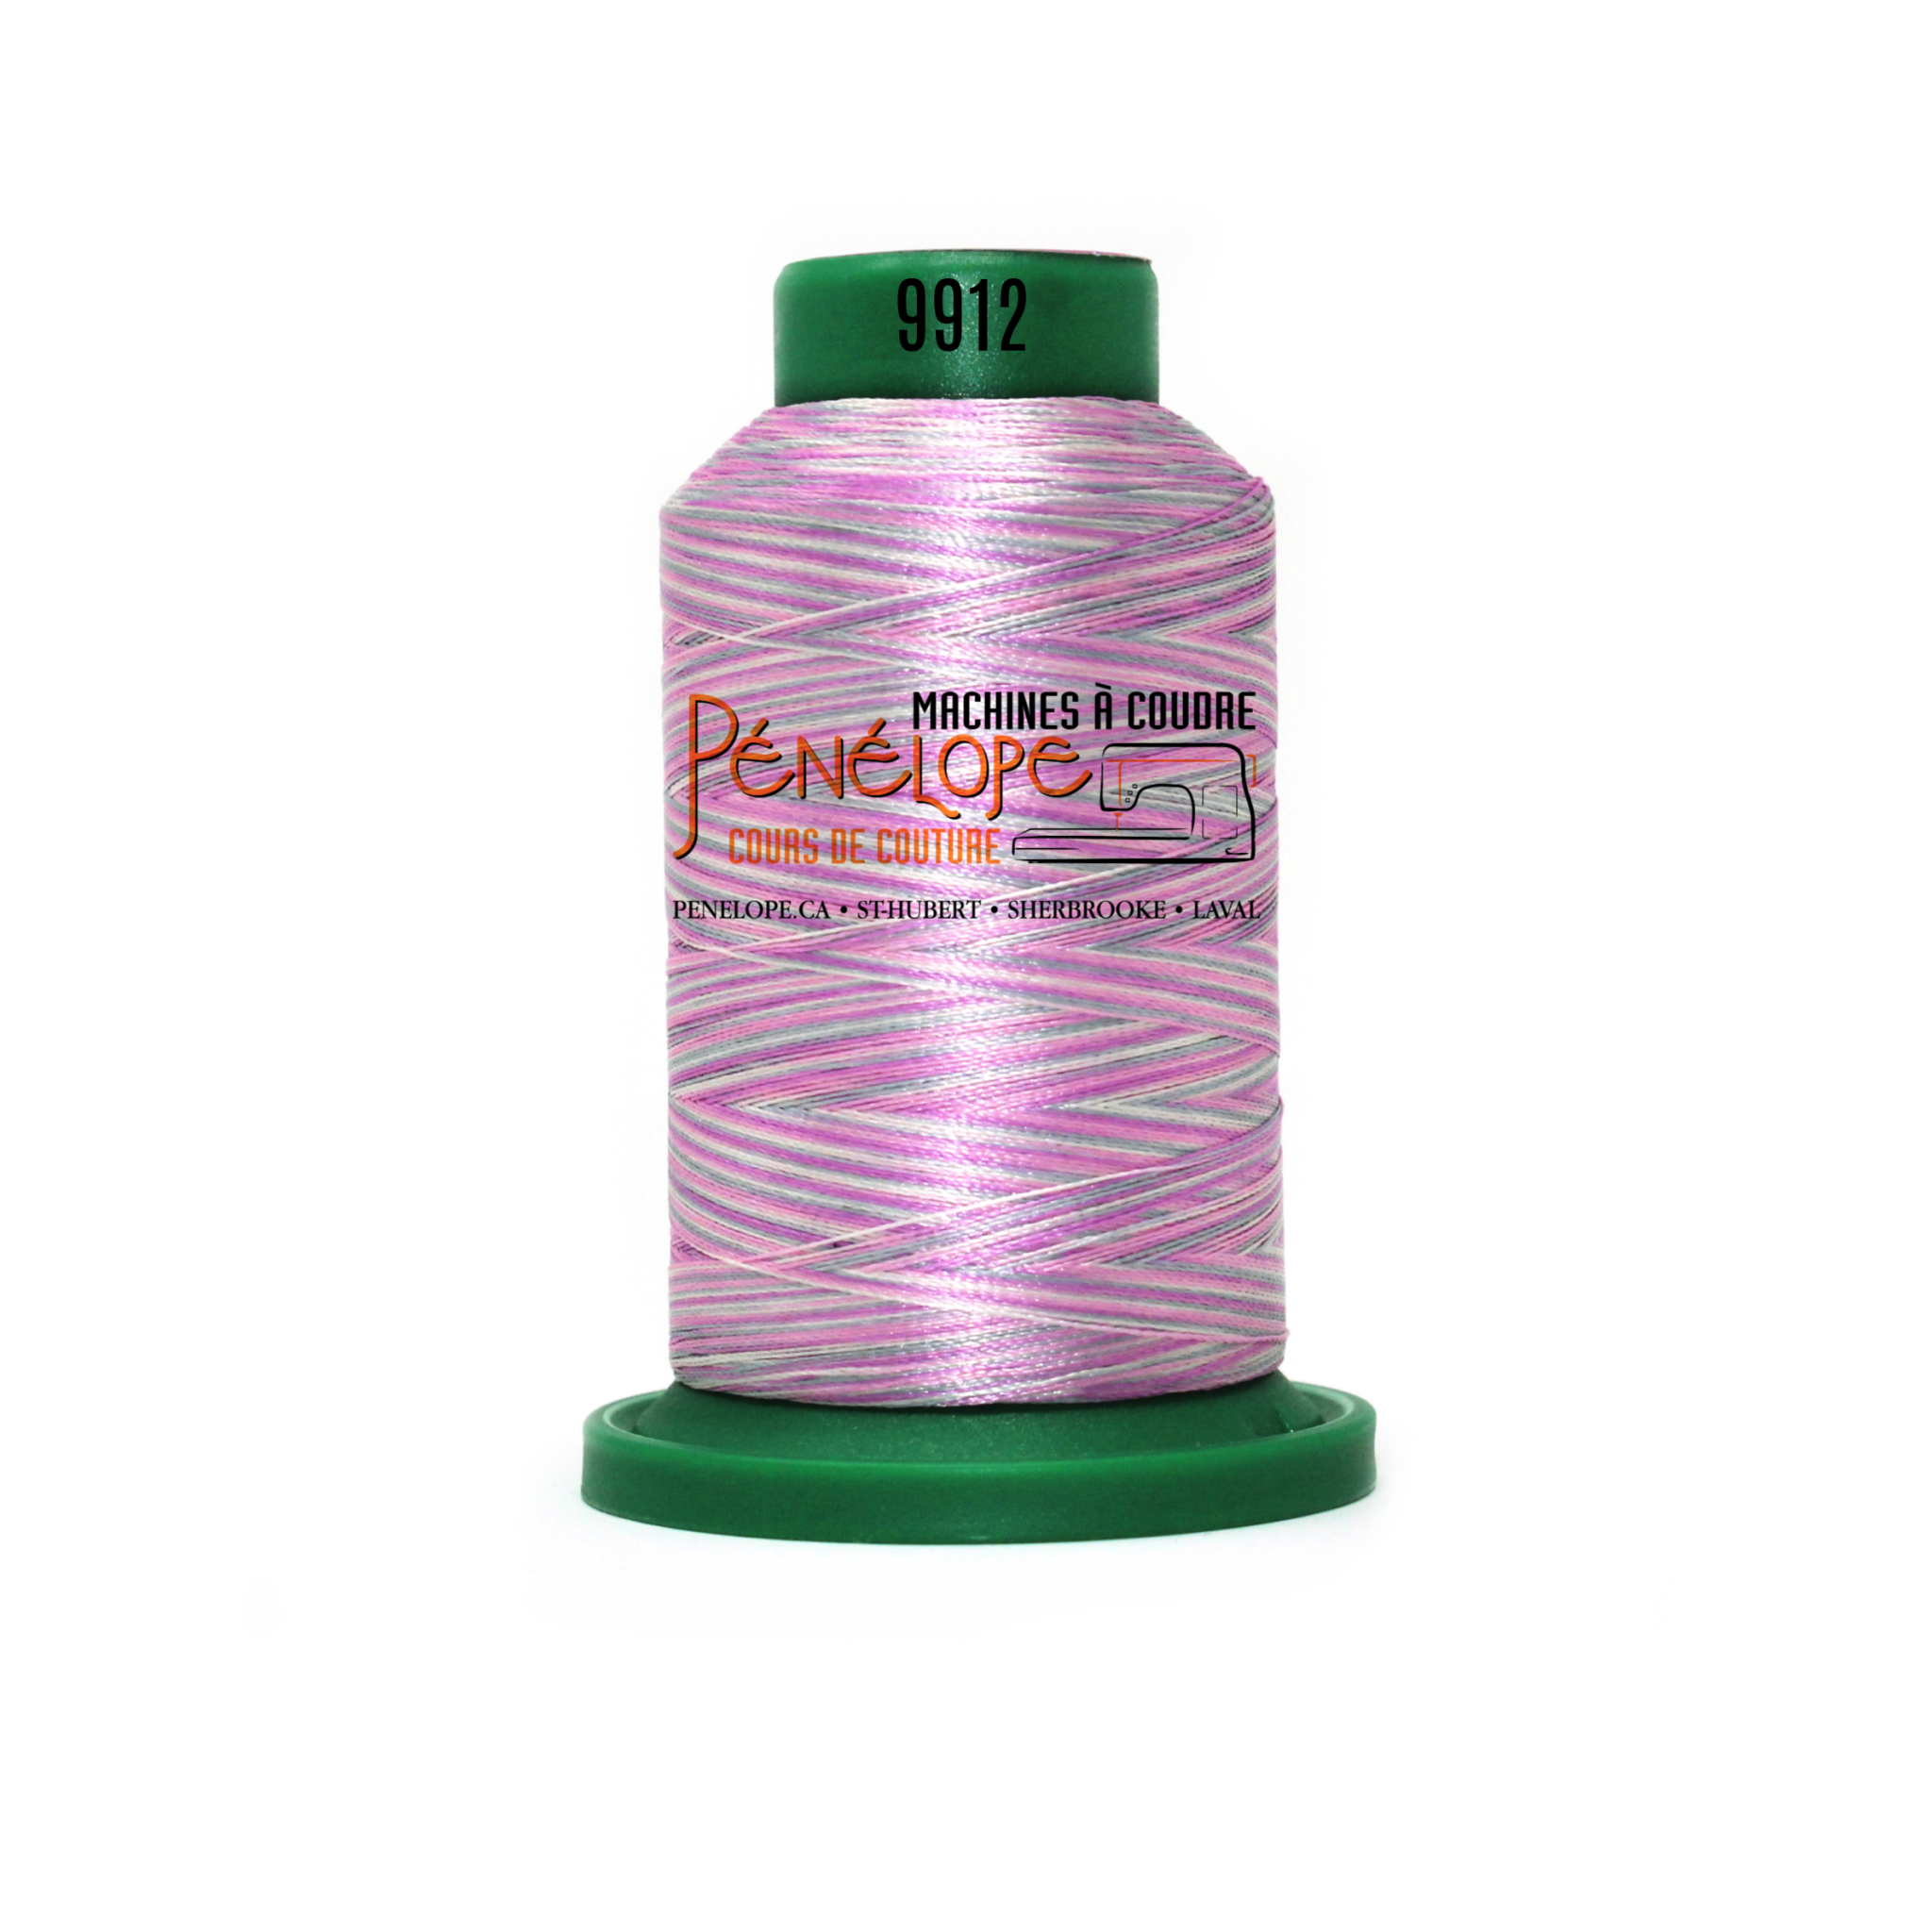 Isacord Isacord multicoloured sewing and embroidery thread 9912 1000m